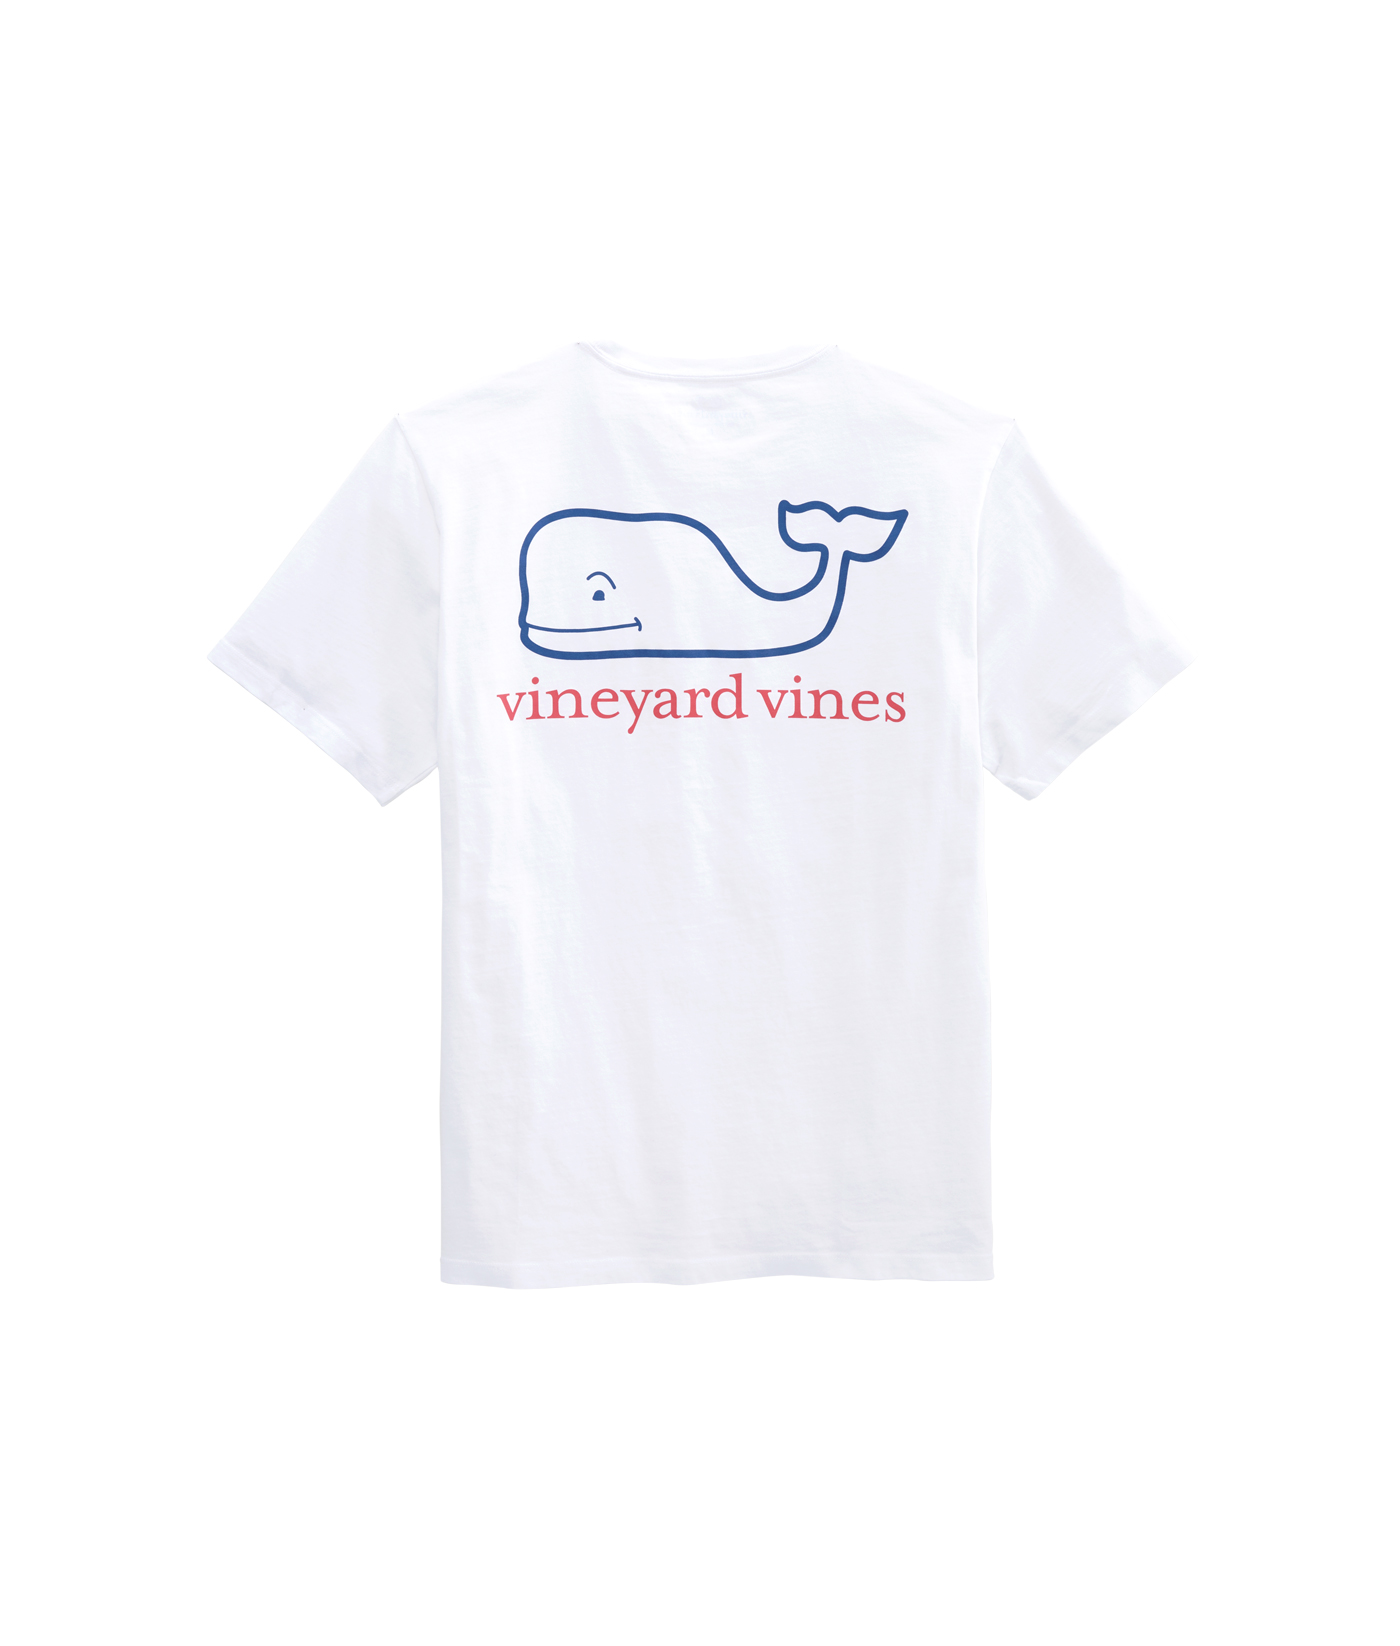 Shop Two Color Whale Short-Sleeve Pocket Tee at vineyard vines